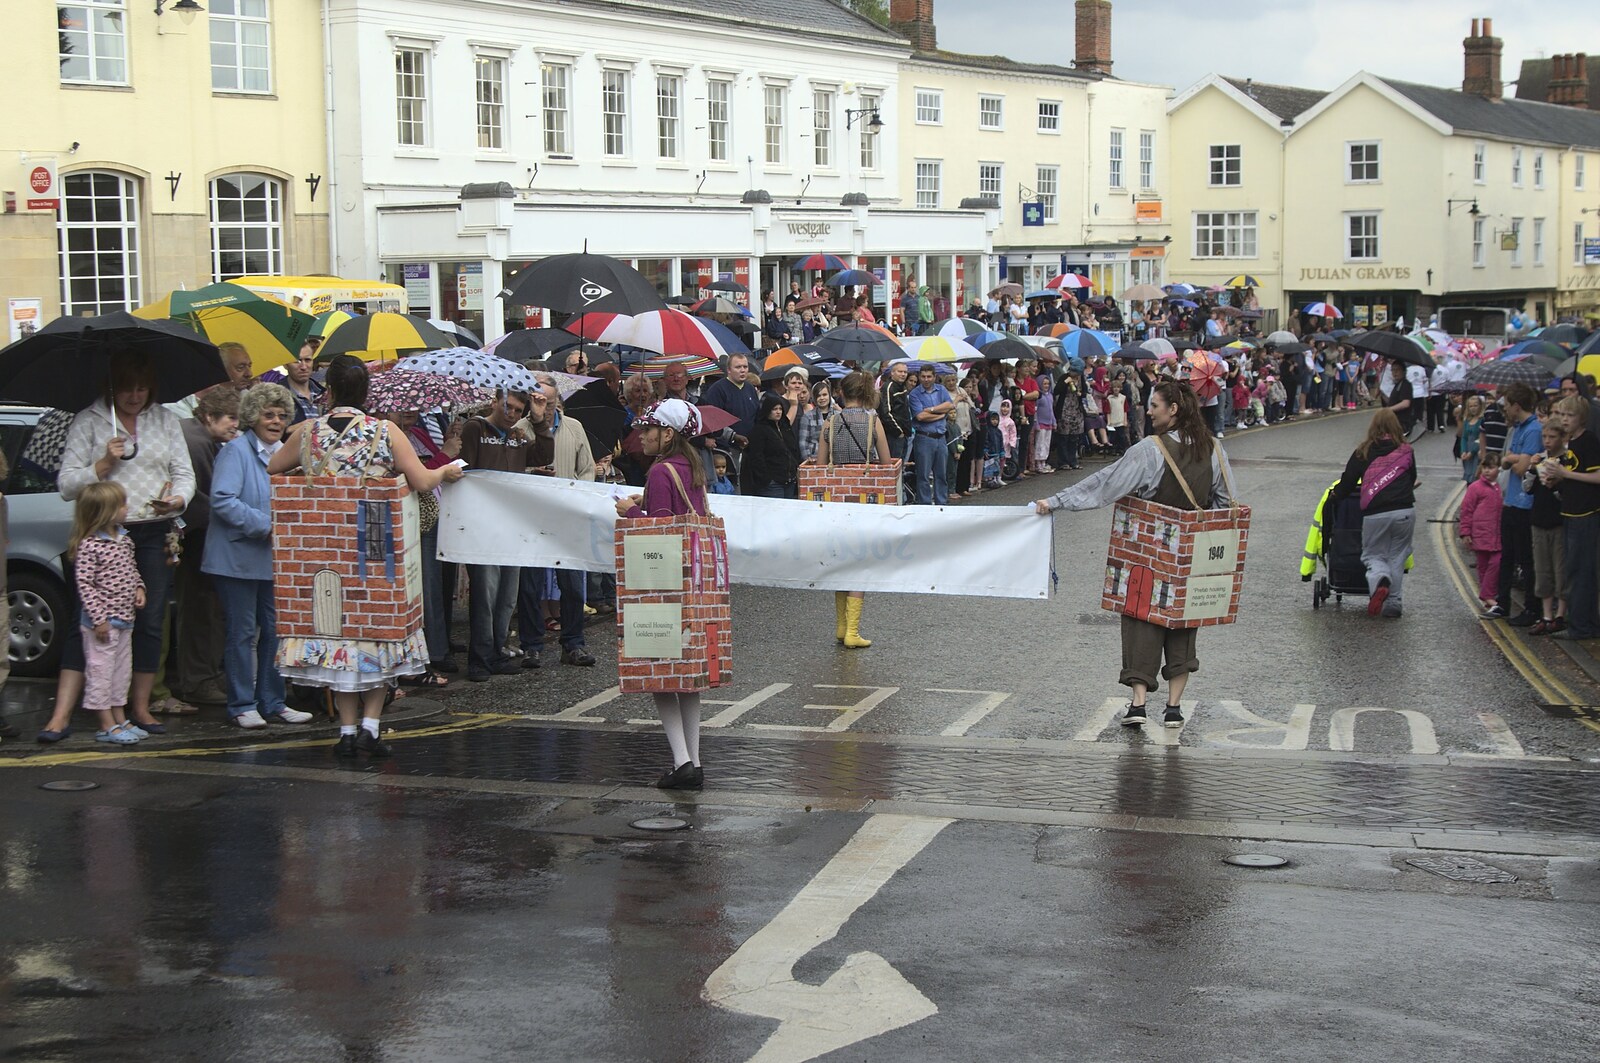 A wet market place from Diss Carnival Procession, Diss, Norfolk - 21st June 2009